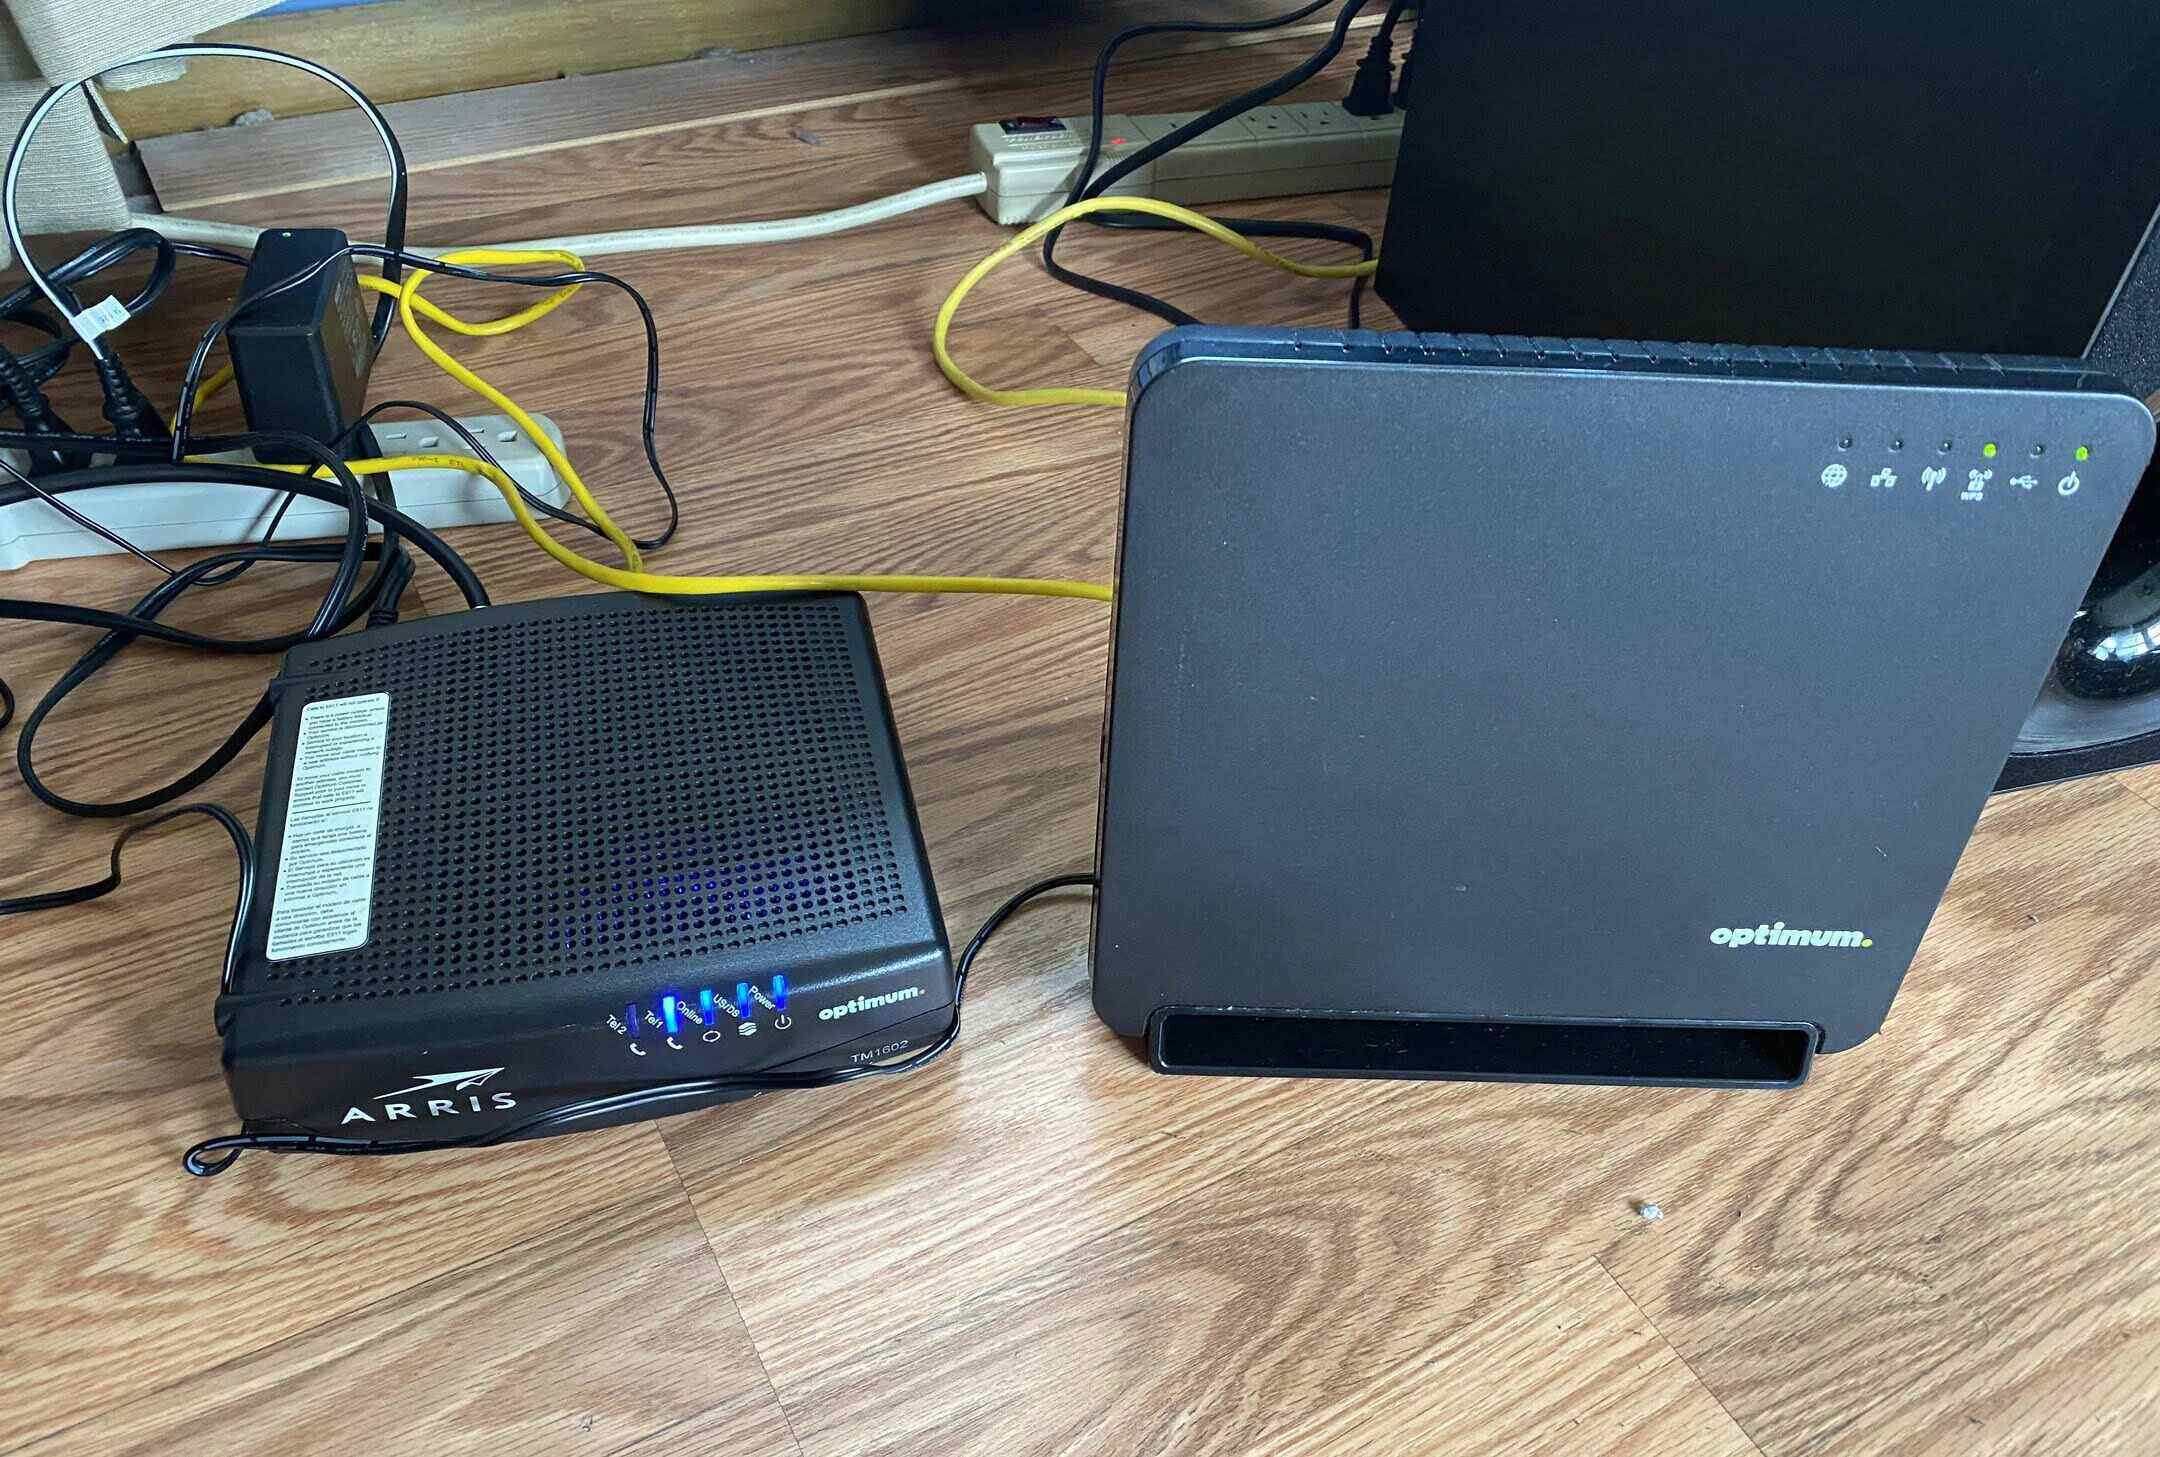 How To Reset Optimum Wi-Fi Router